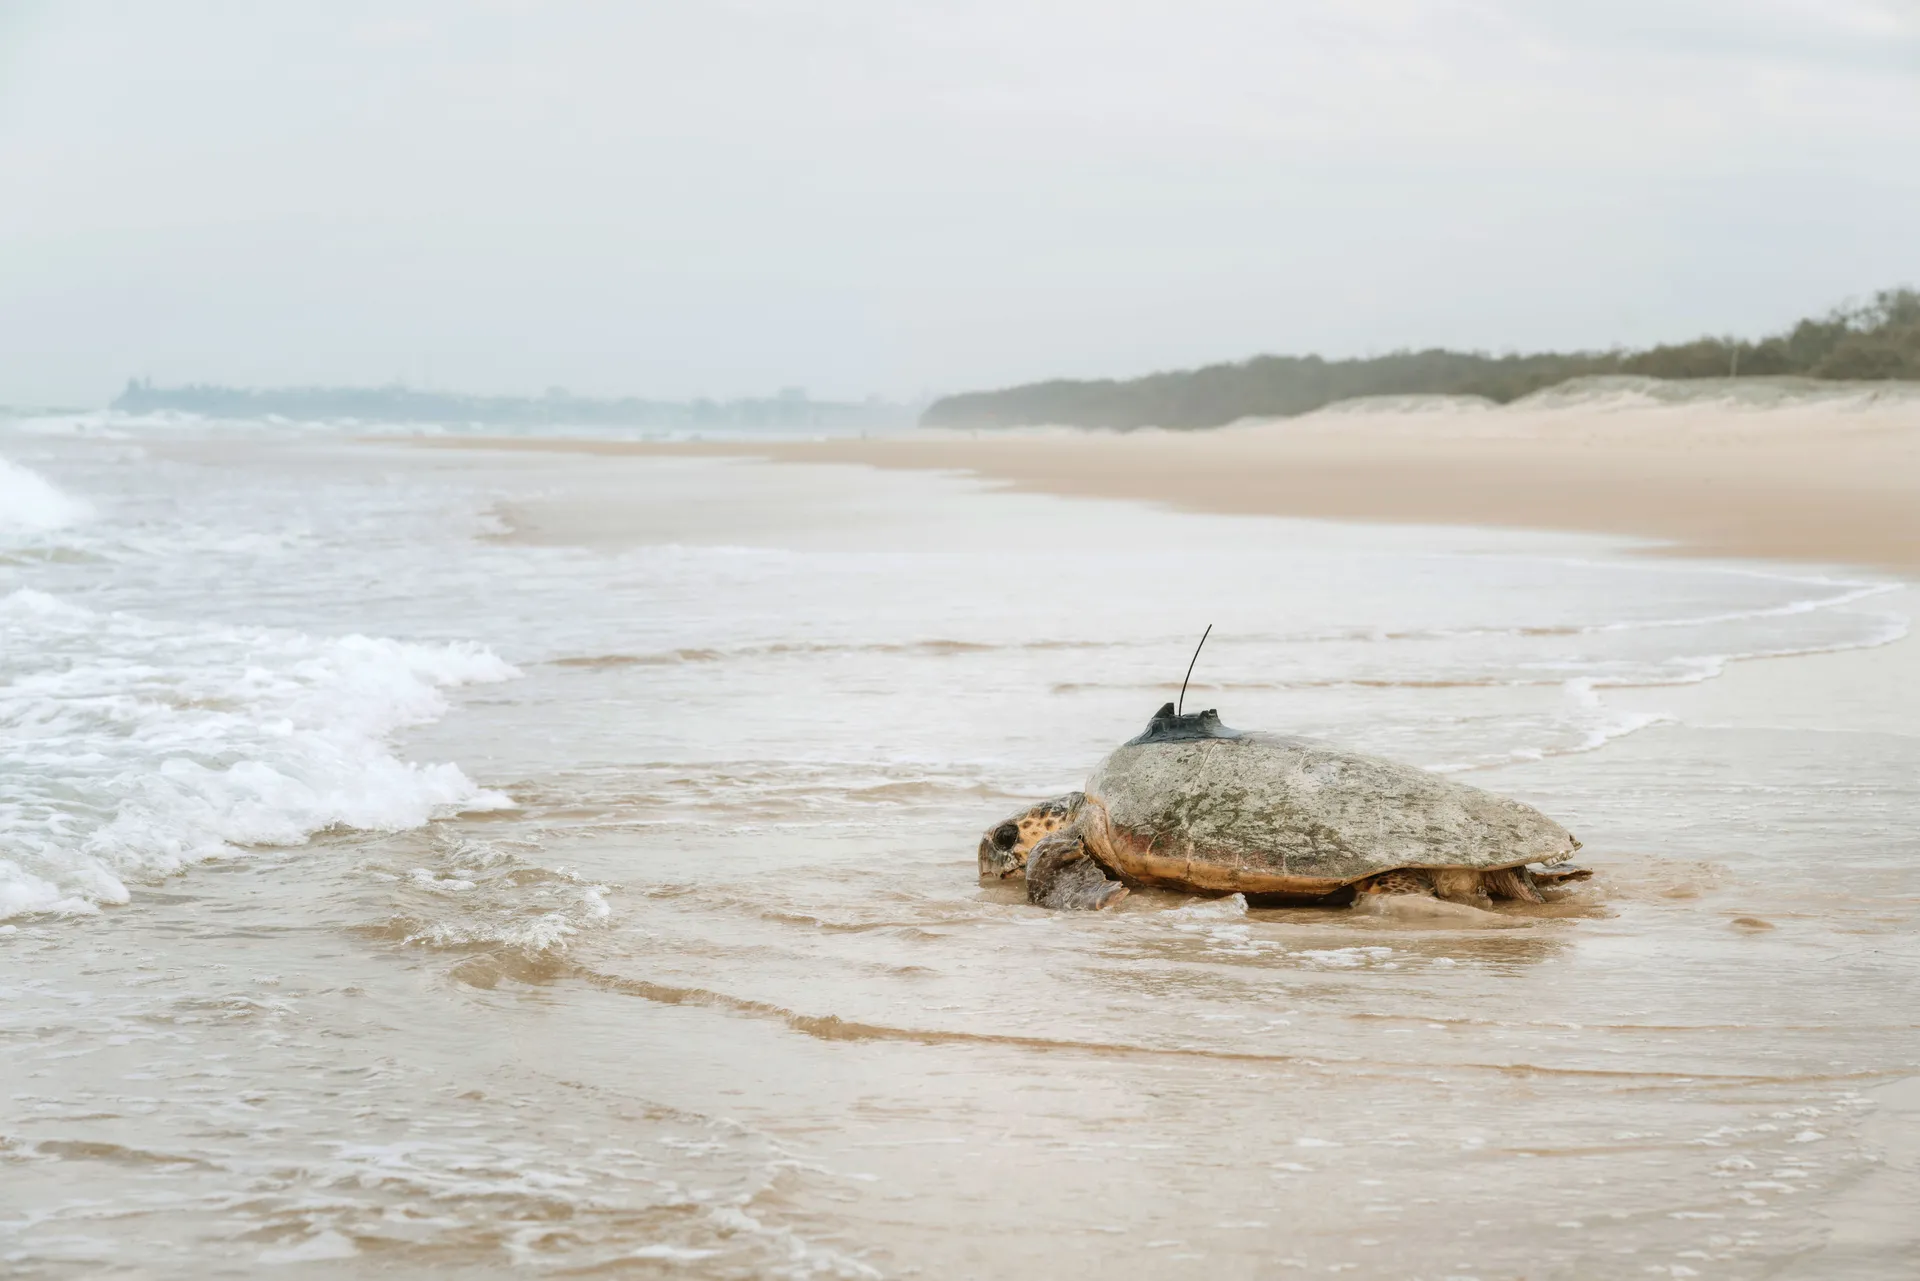 A GPS tracking device was gently secured to her shell to be able to track her movements in real time. The tracker will last between three and 12 months. Credit Adriana Watson.